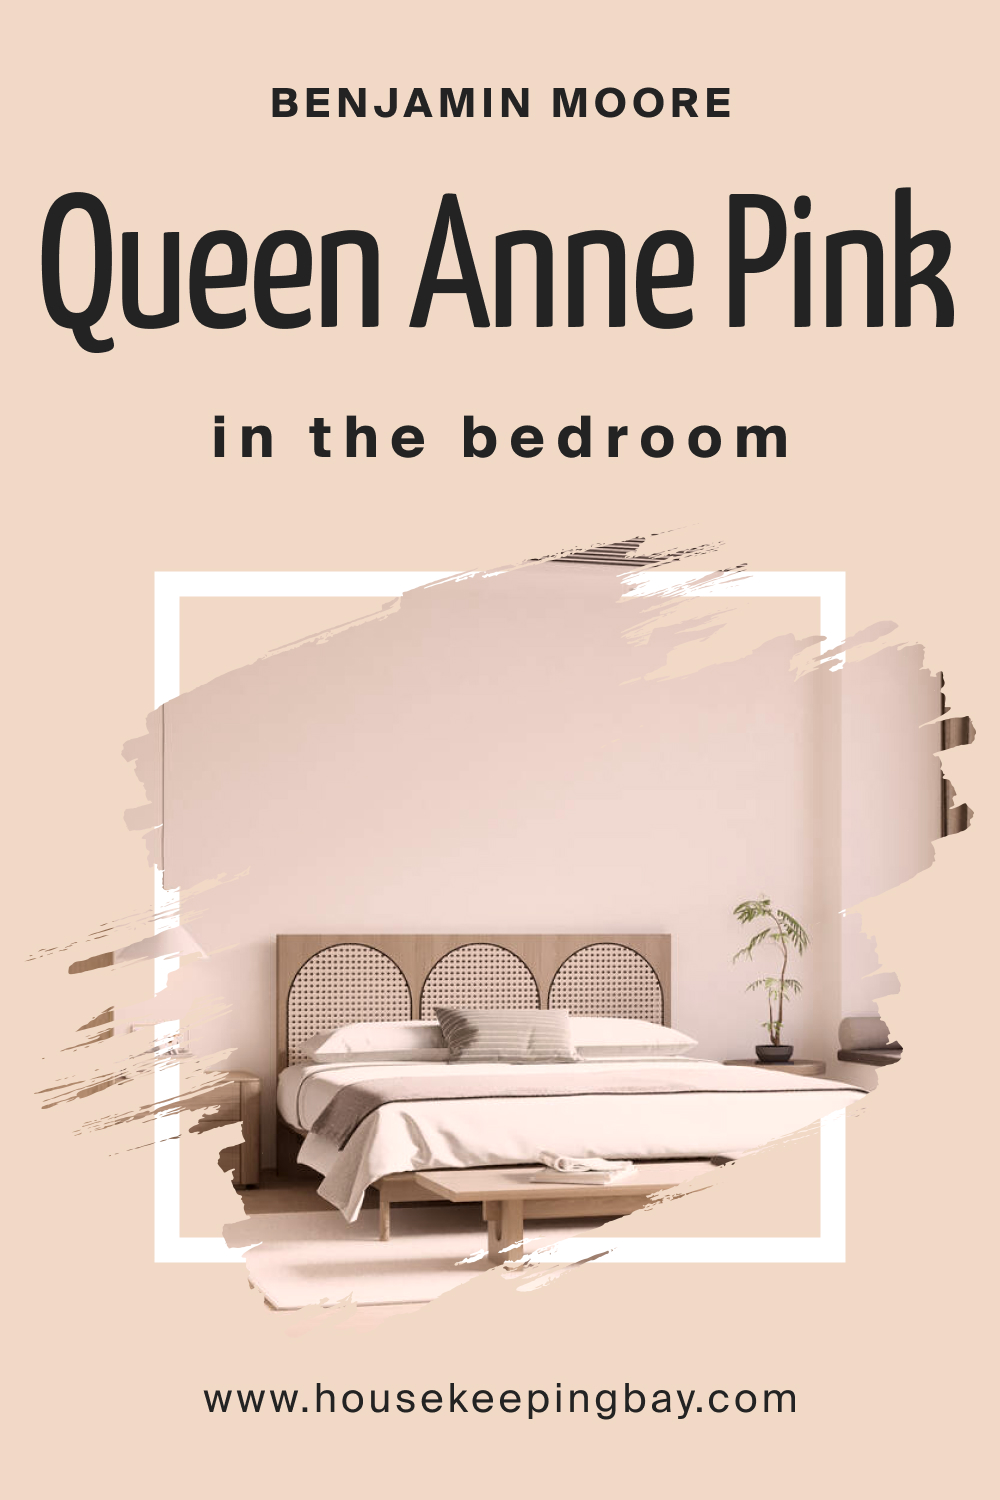 How to Use Queen Anne Pink HC-60 in the Bedroom?